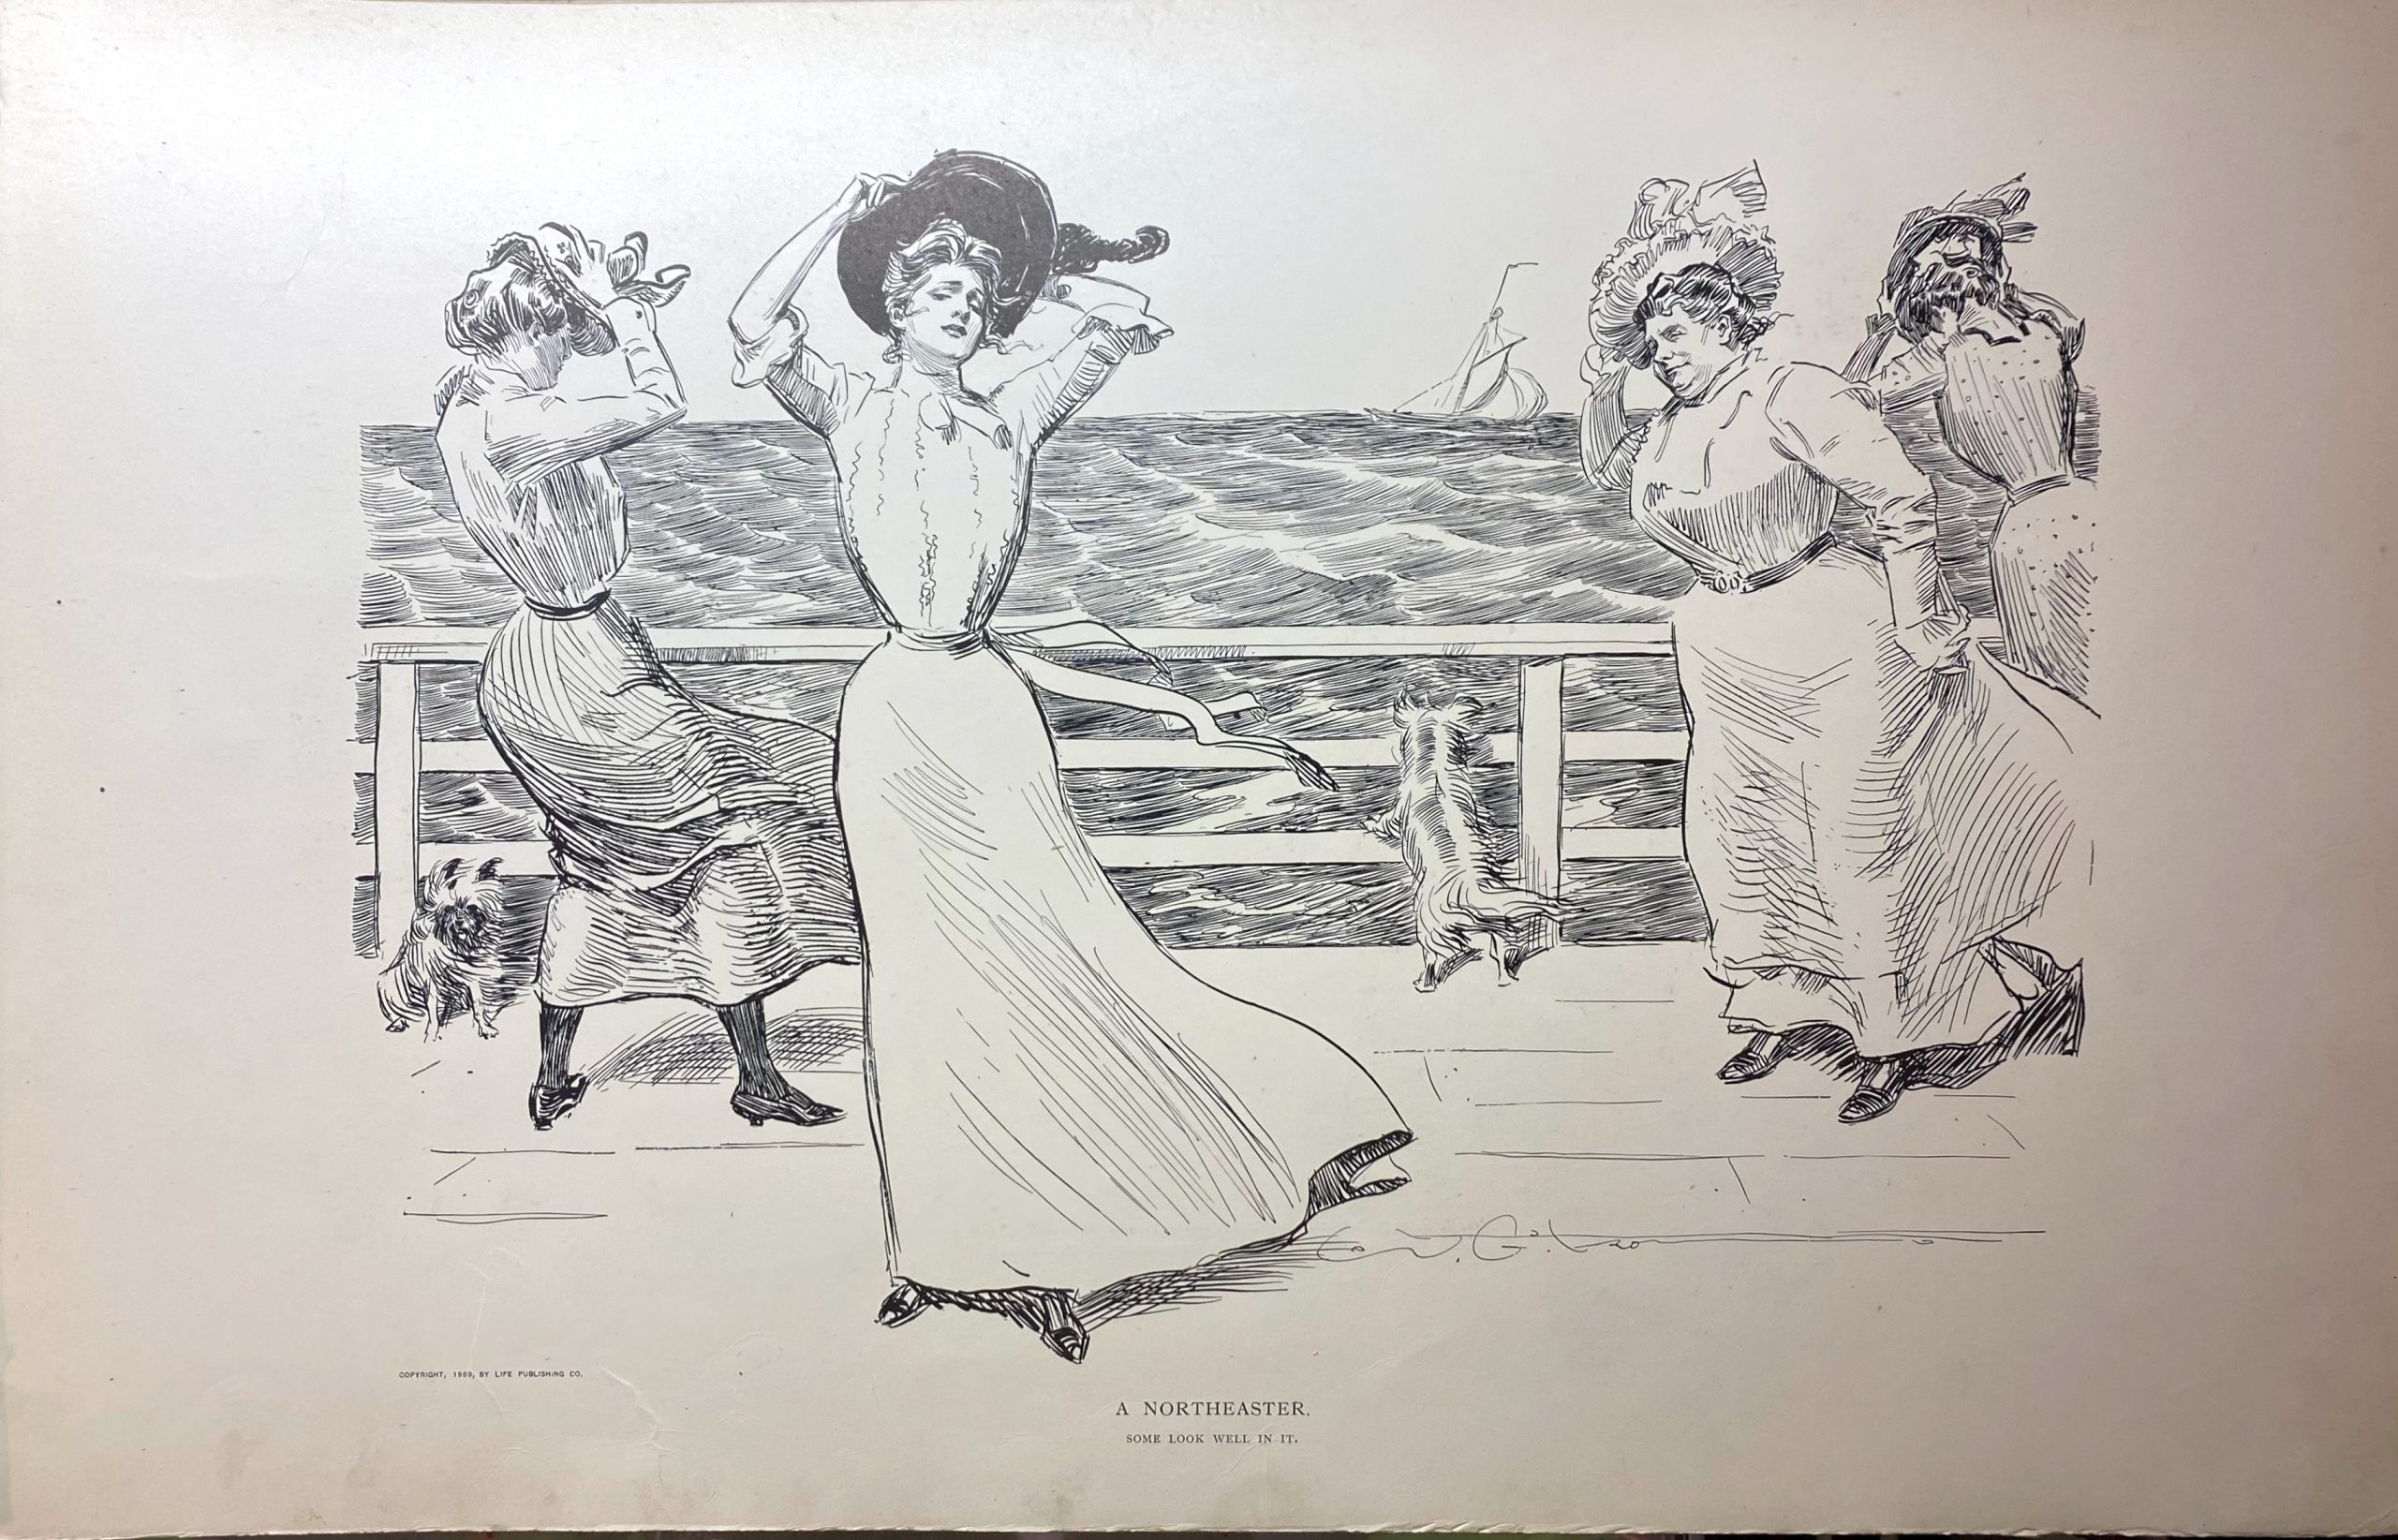 This is a Gibson's Girls drawing with the ladies being impacted by a windy day near the water